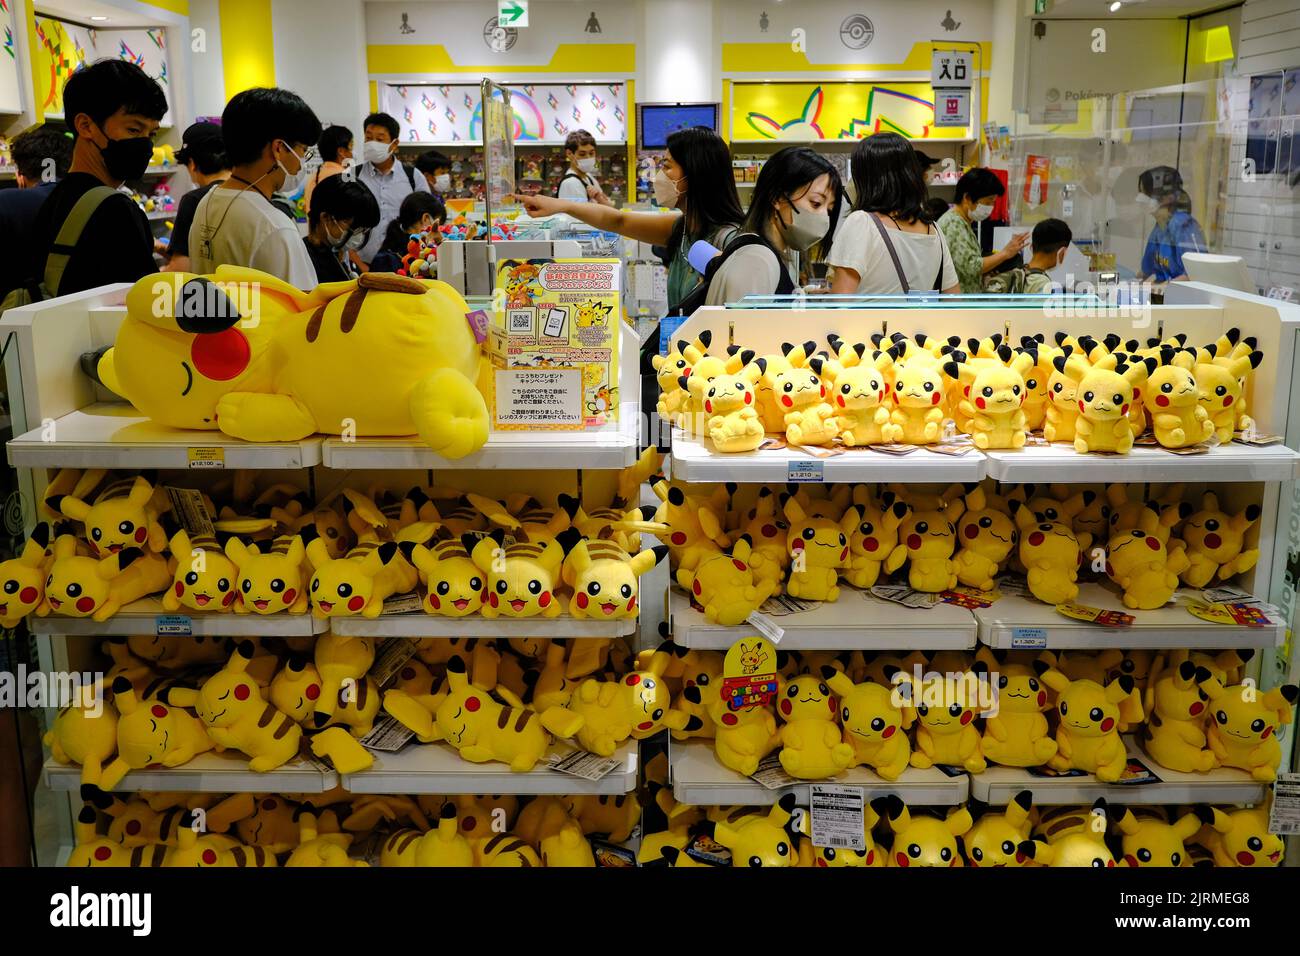 Japan Pokémon Center video shows off new Kyoto store and merchandise –  Nintendo Wire